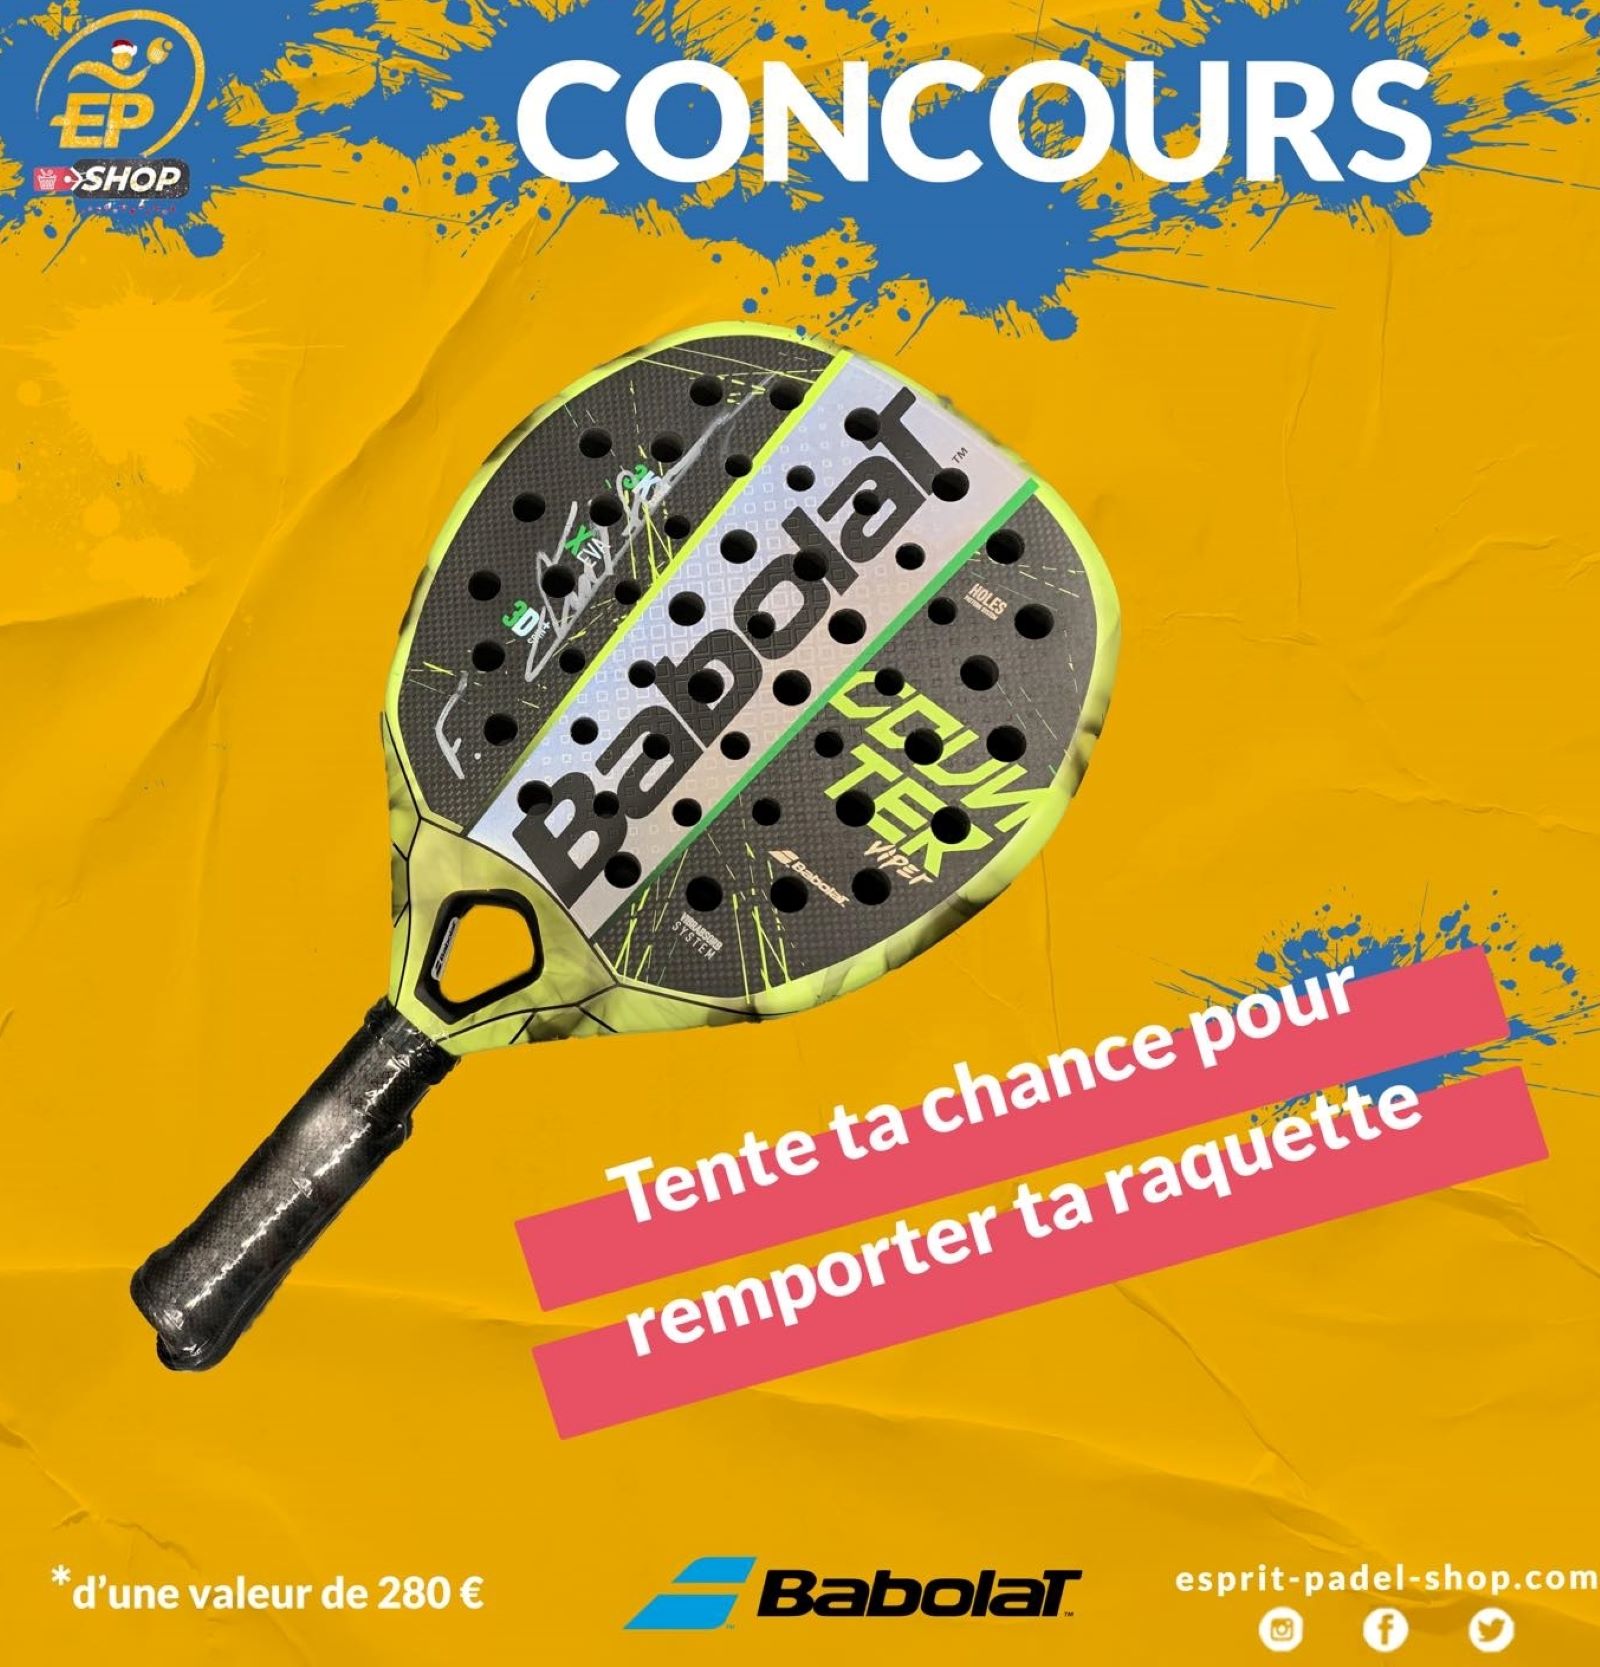 Mind Padel Shop starts the year with a contest!